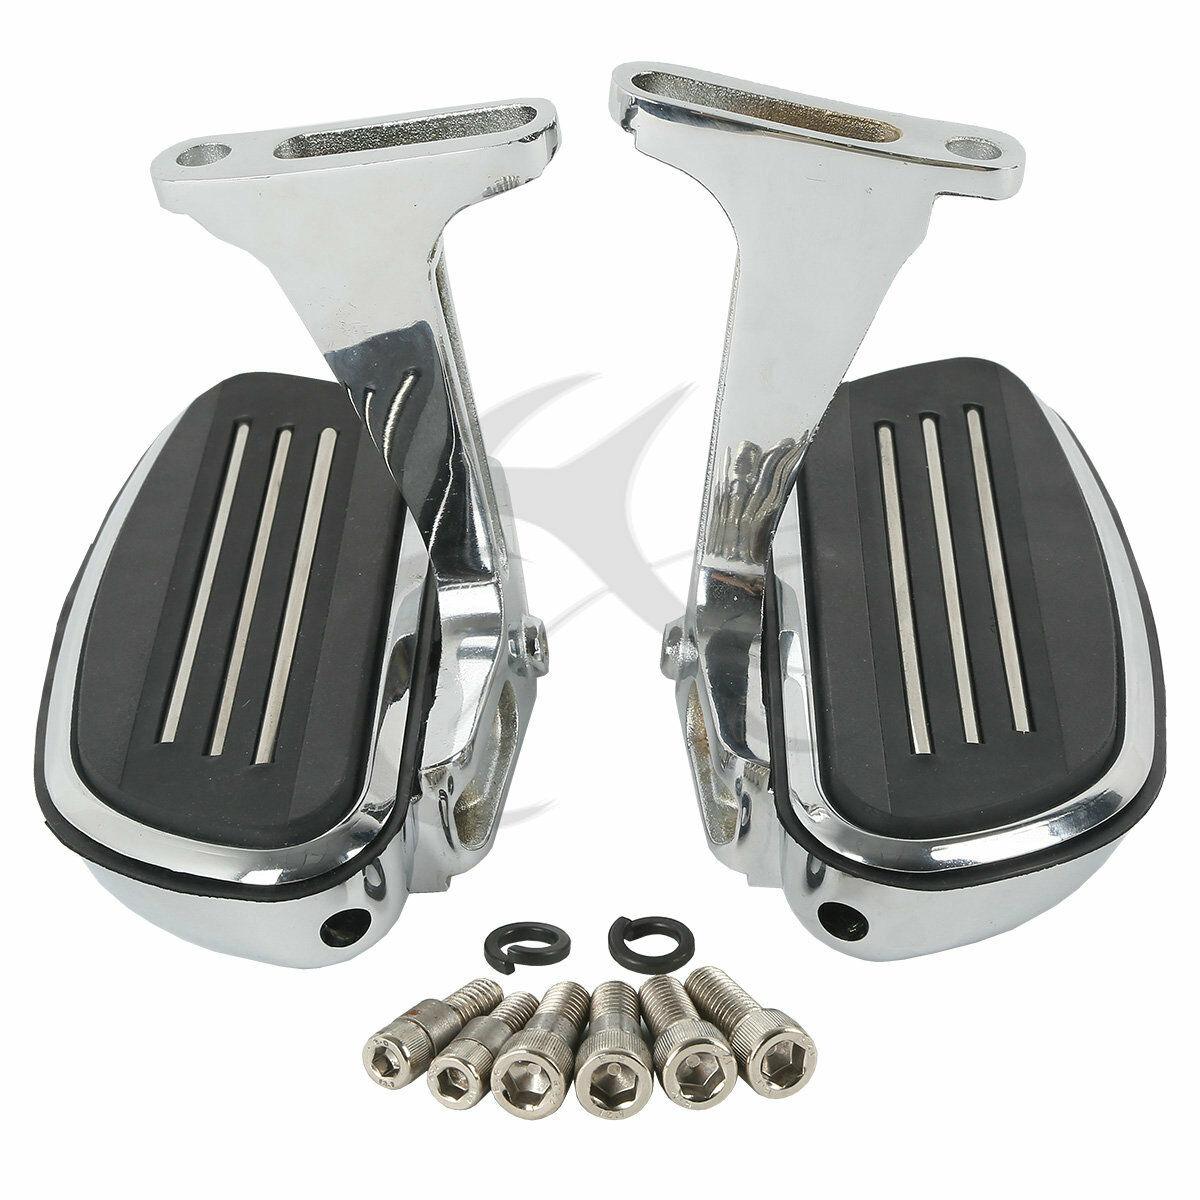 Pegstreamliner Passenger Foot Floor board Fit For Harley Touring Road King 93-21 - Moto Life Products